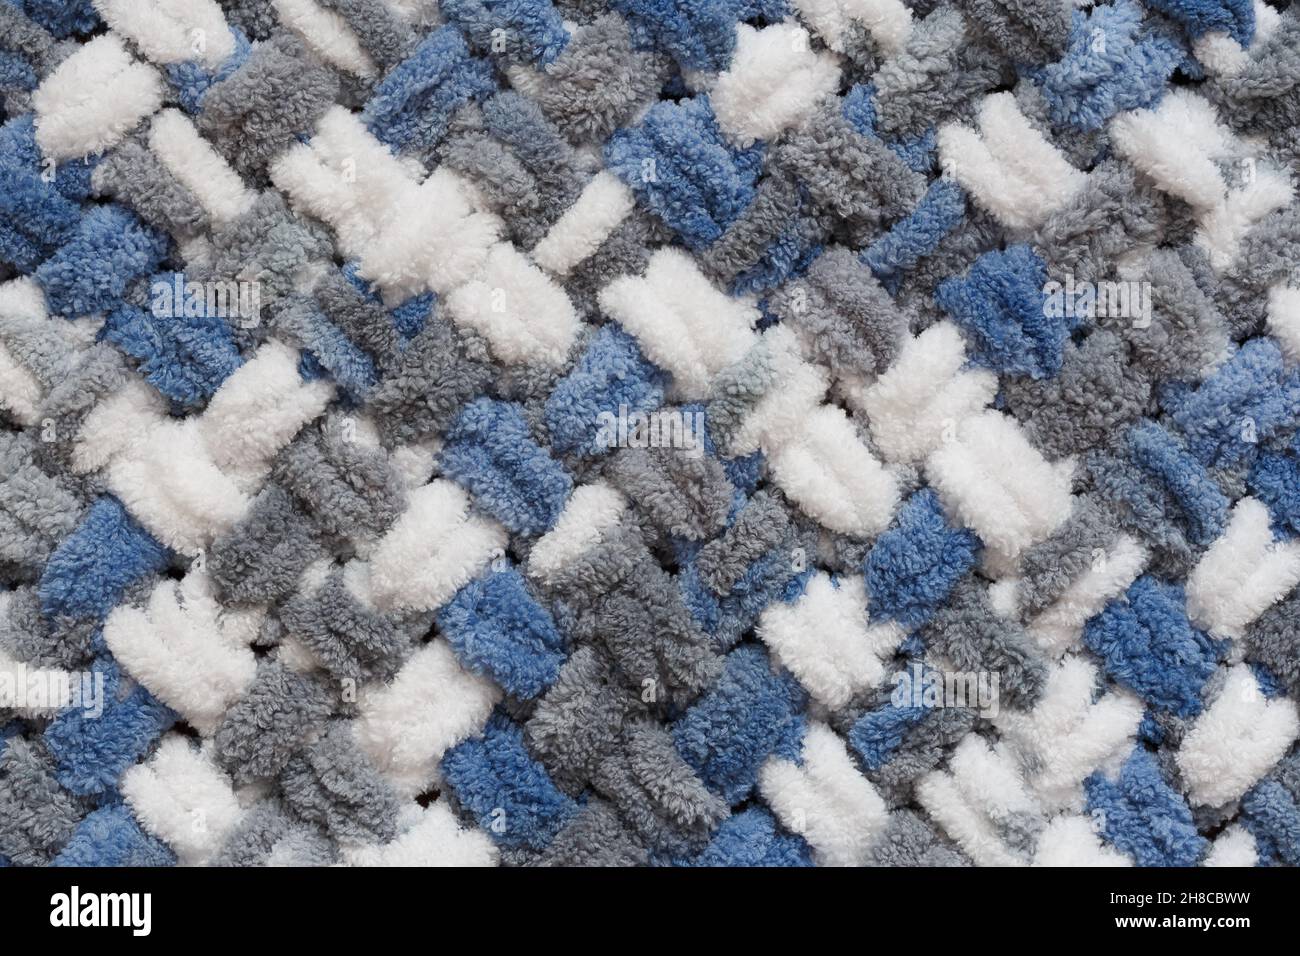 Fluffy knitting structure of gray, blue and white threads, close-up view from the top Stock Photo